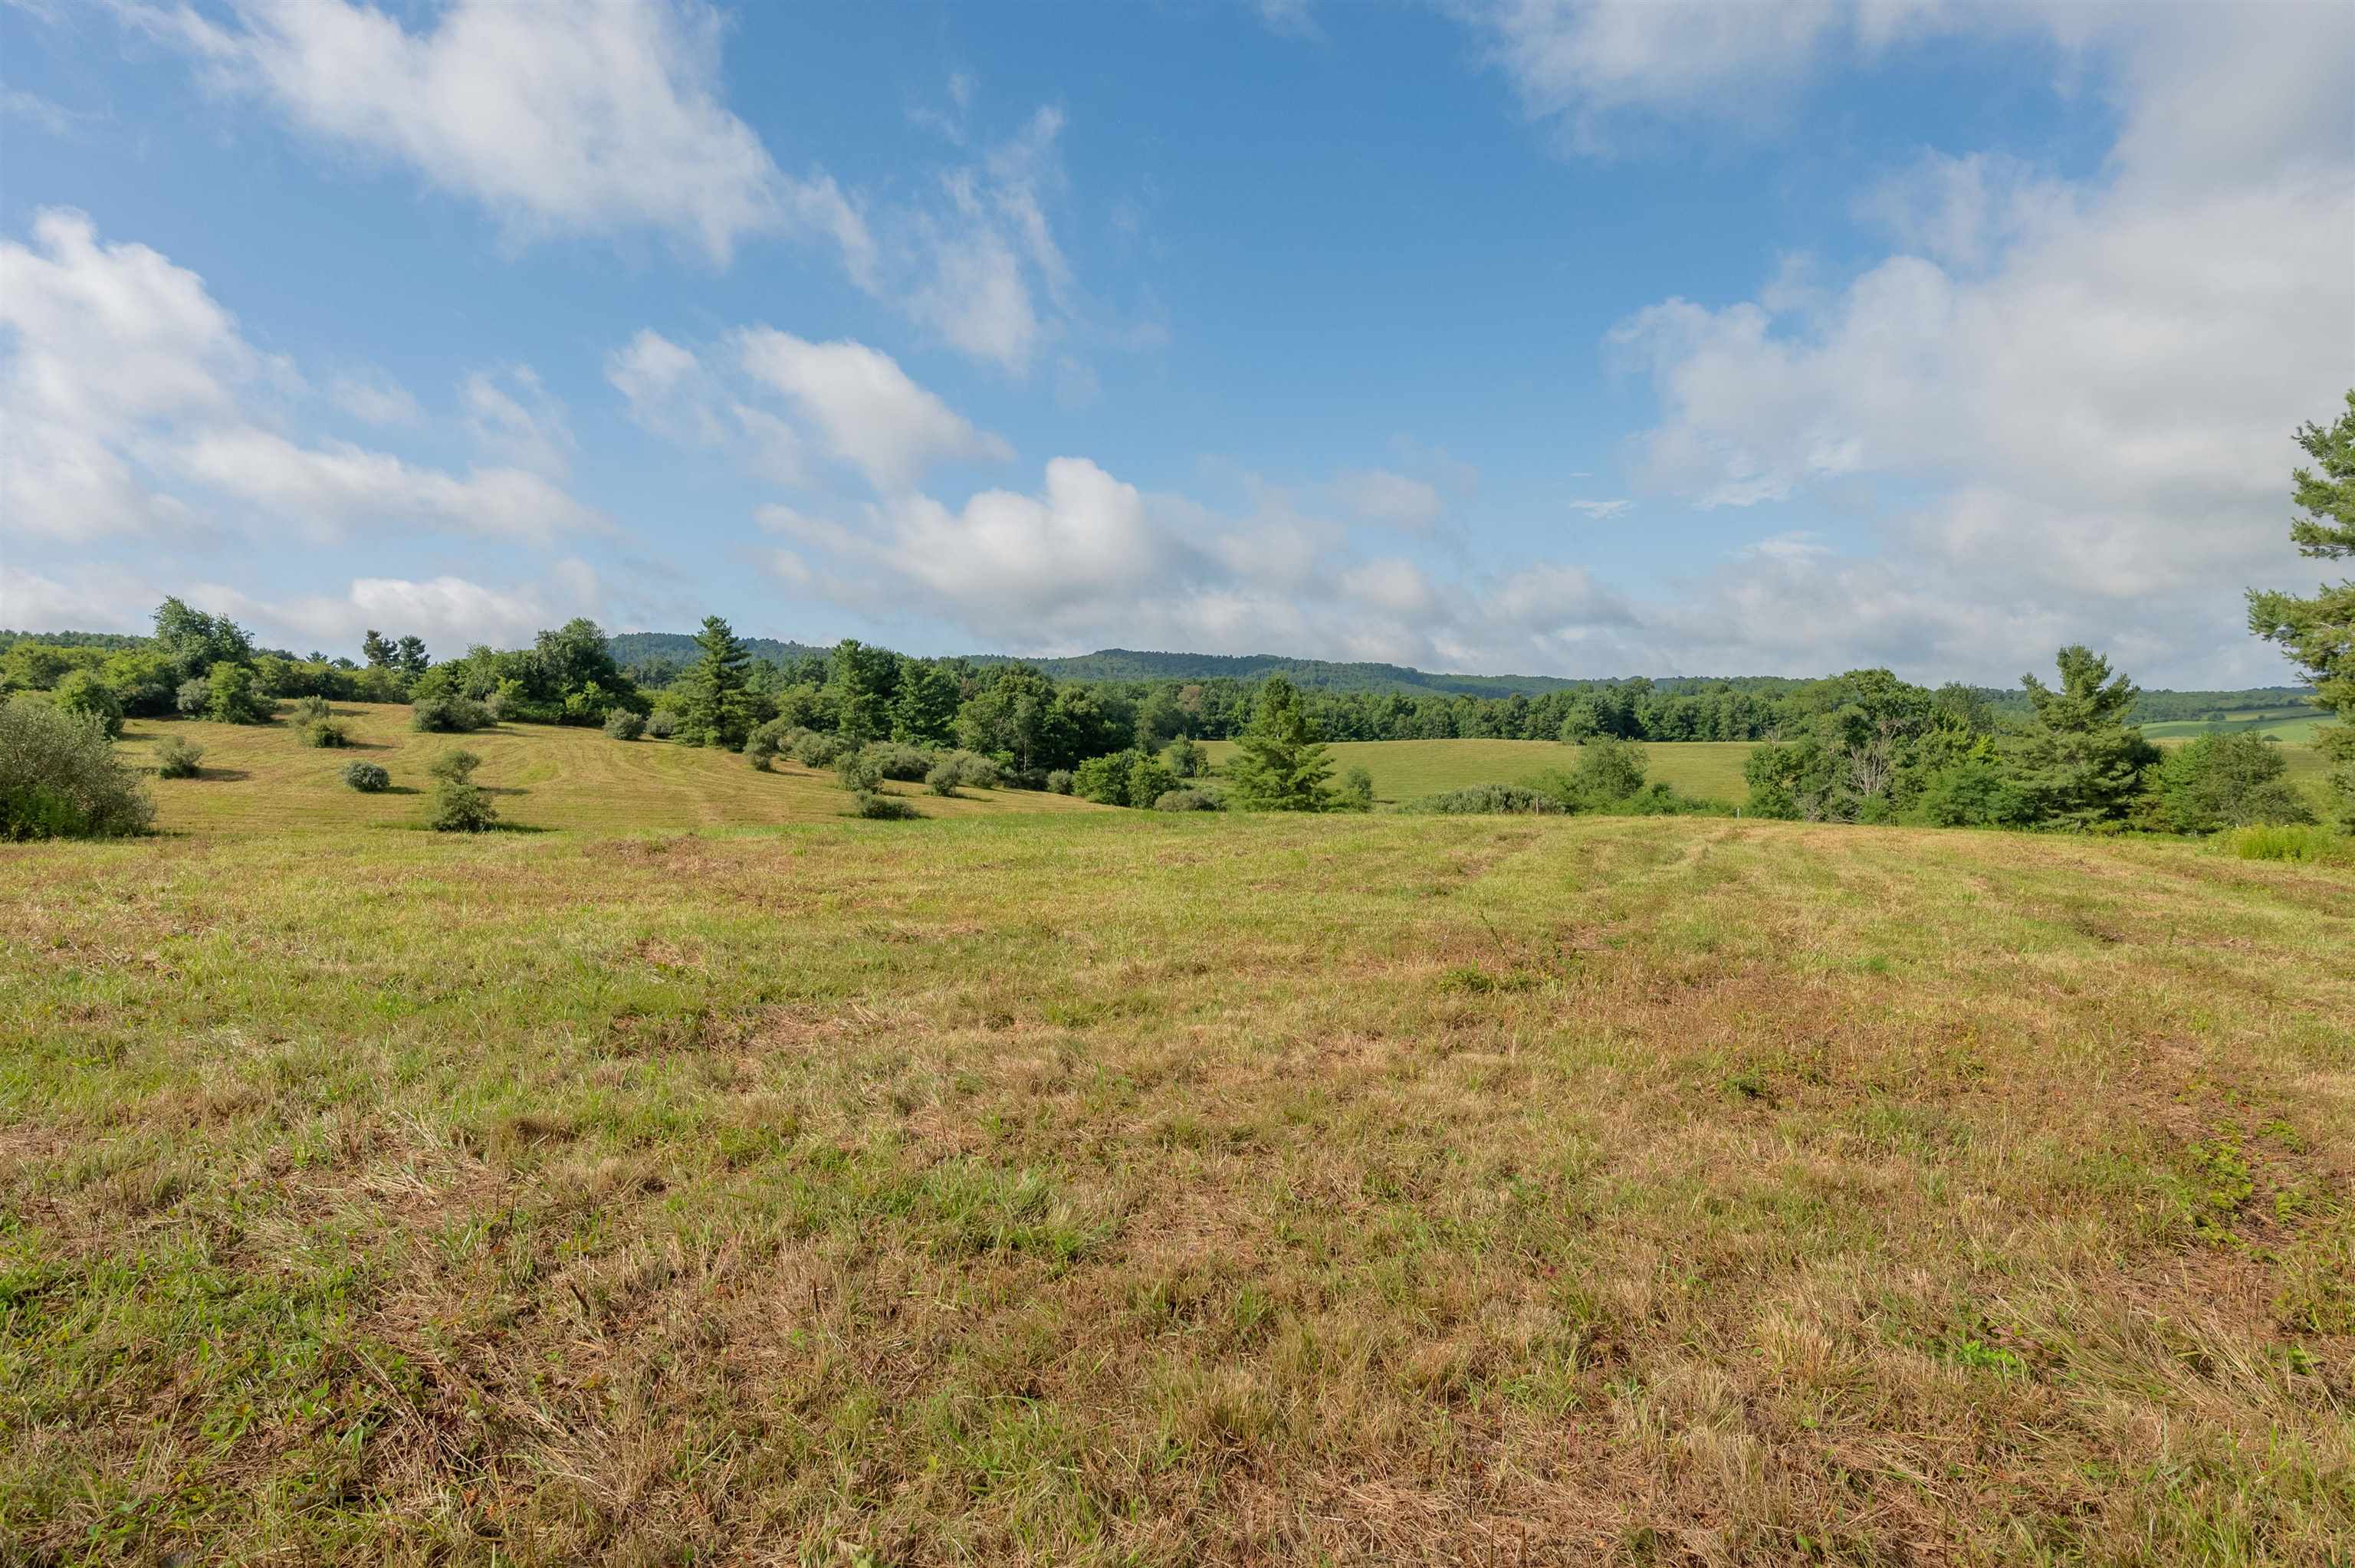 Looking for land to build your forever home? We have you covered! Take a look at this gorgeous piece of land, including views and peaceful setting, about a 15 - 20-minute drive to downtown Floyd, VA. The land lays well and has been perked for a three bedroom home along with access to power. Do not miss out on this opportunity to find your own little piece of paradise. Call or text to schedule a showing today!